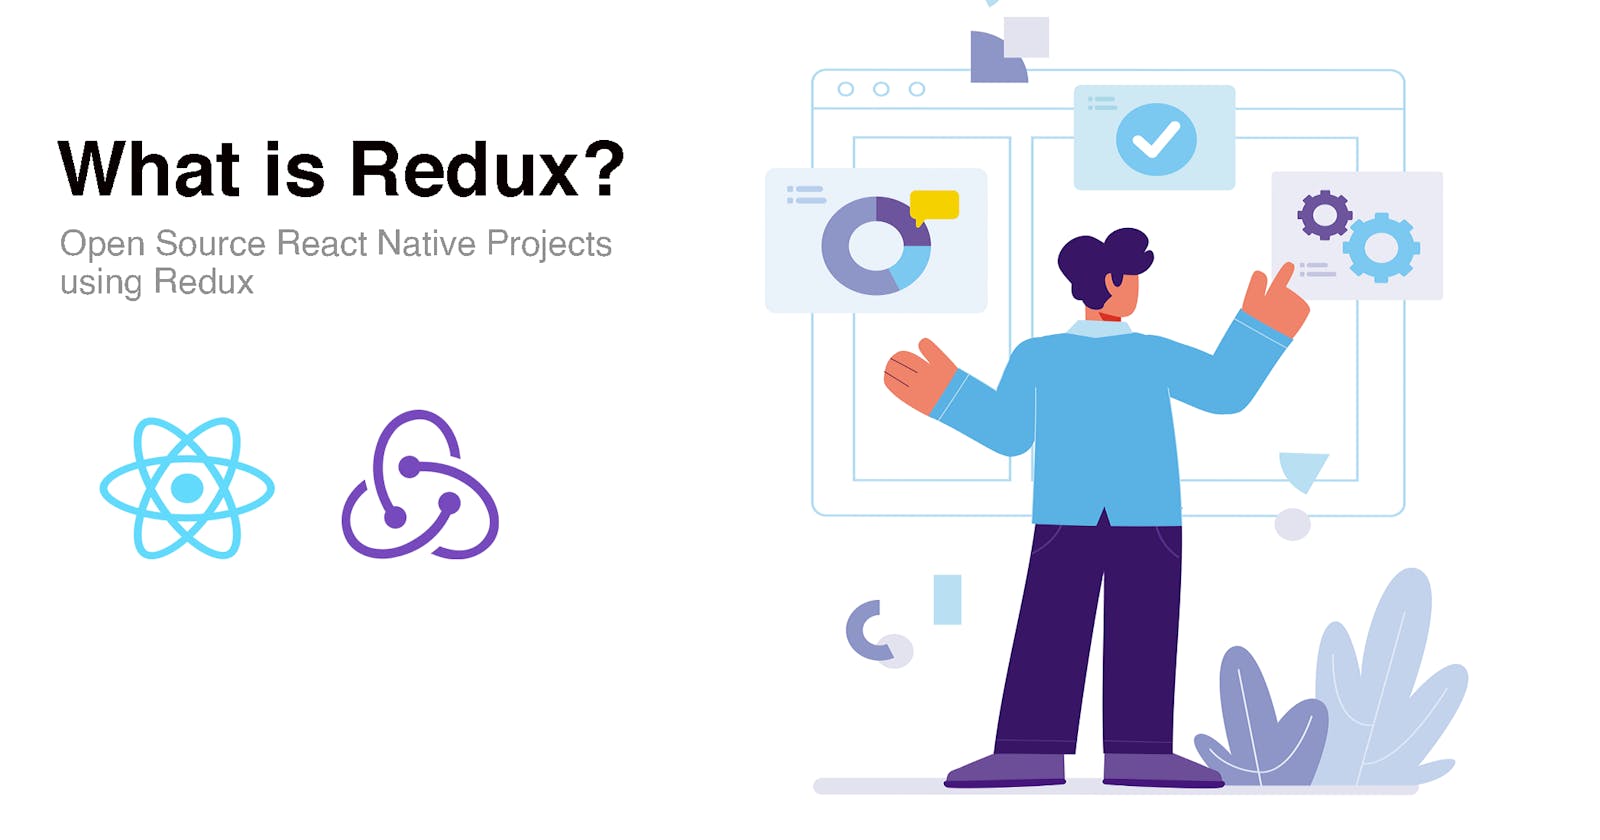 What is Redux? A List of Open Source React Native Projects using Redux.